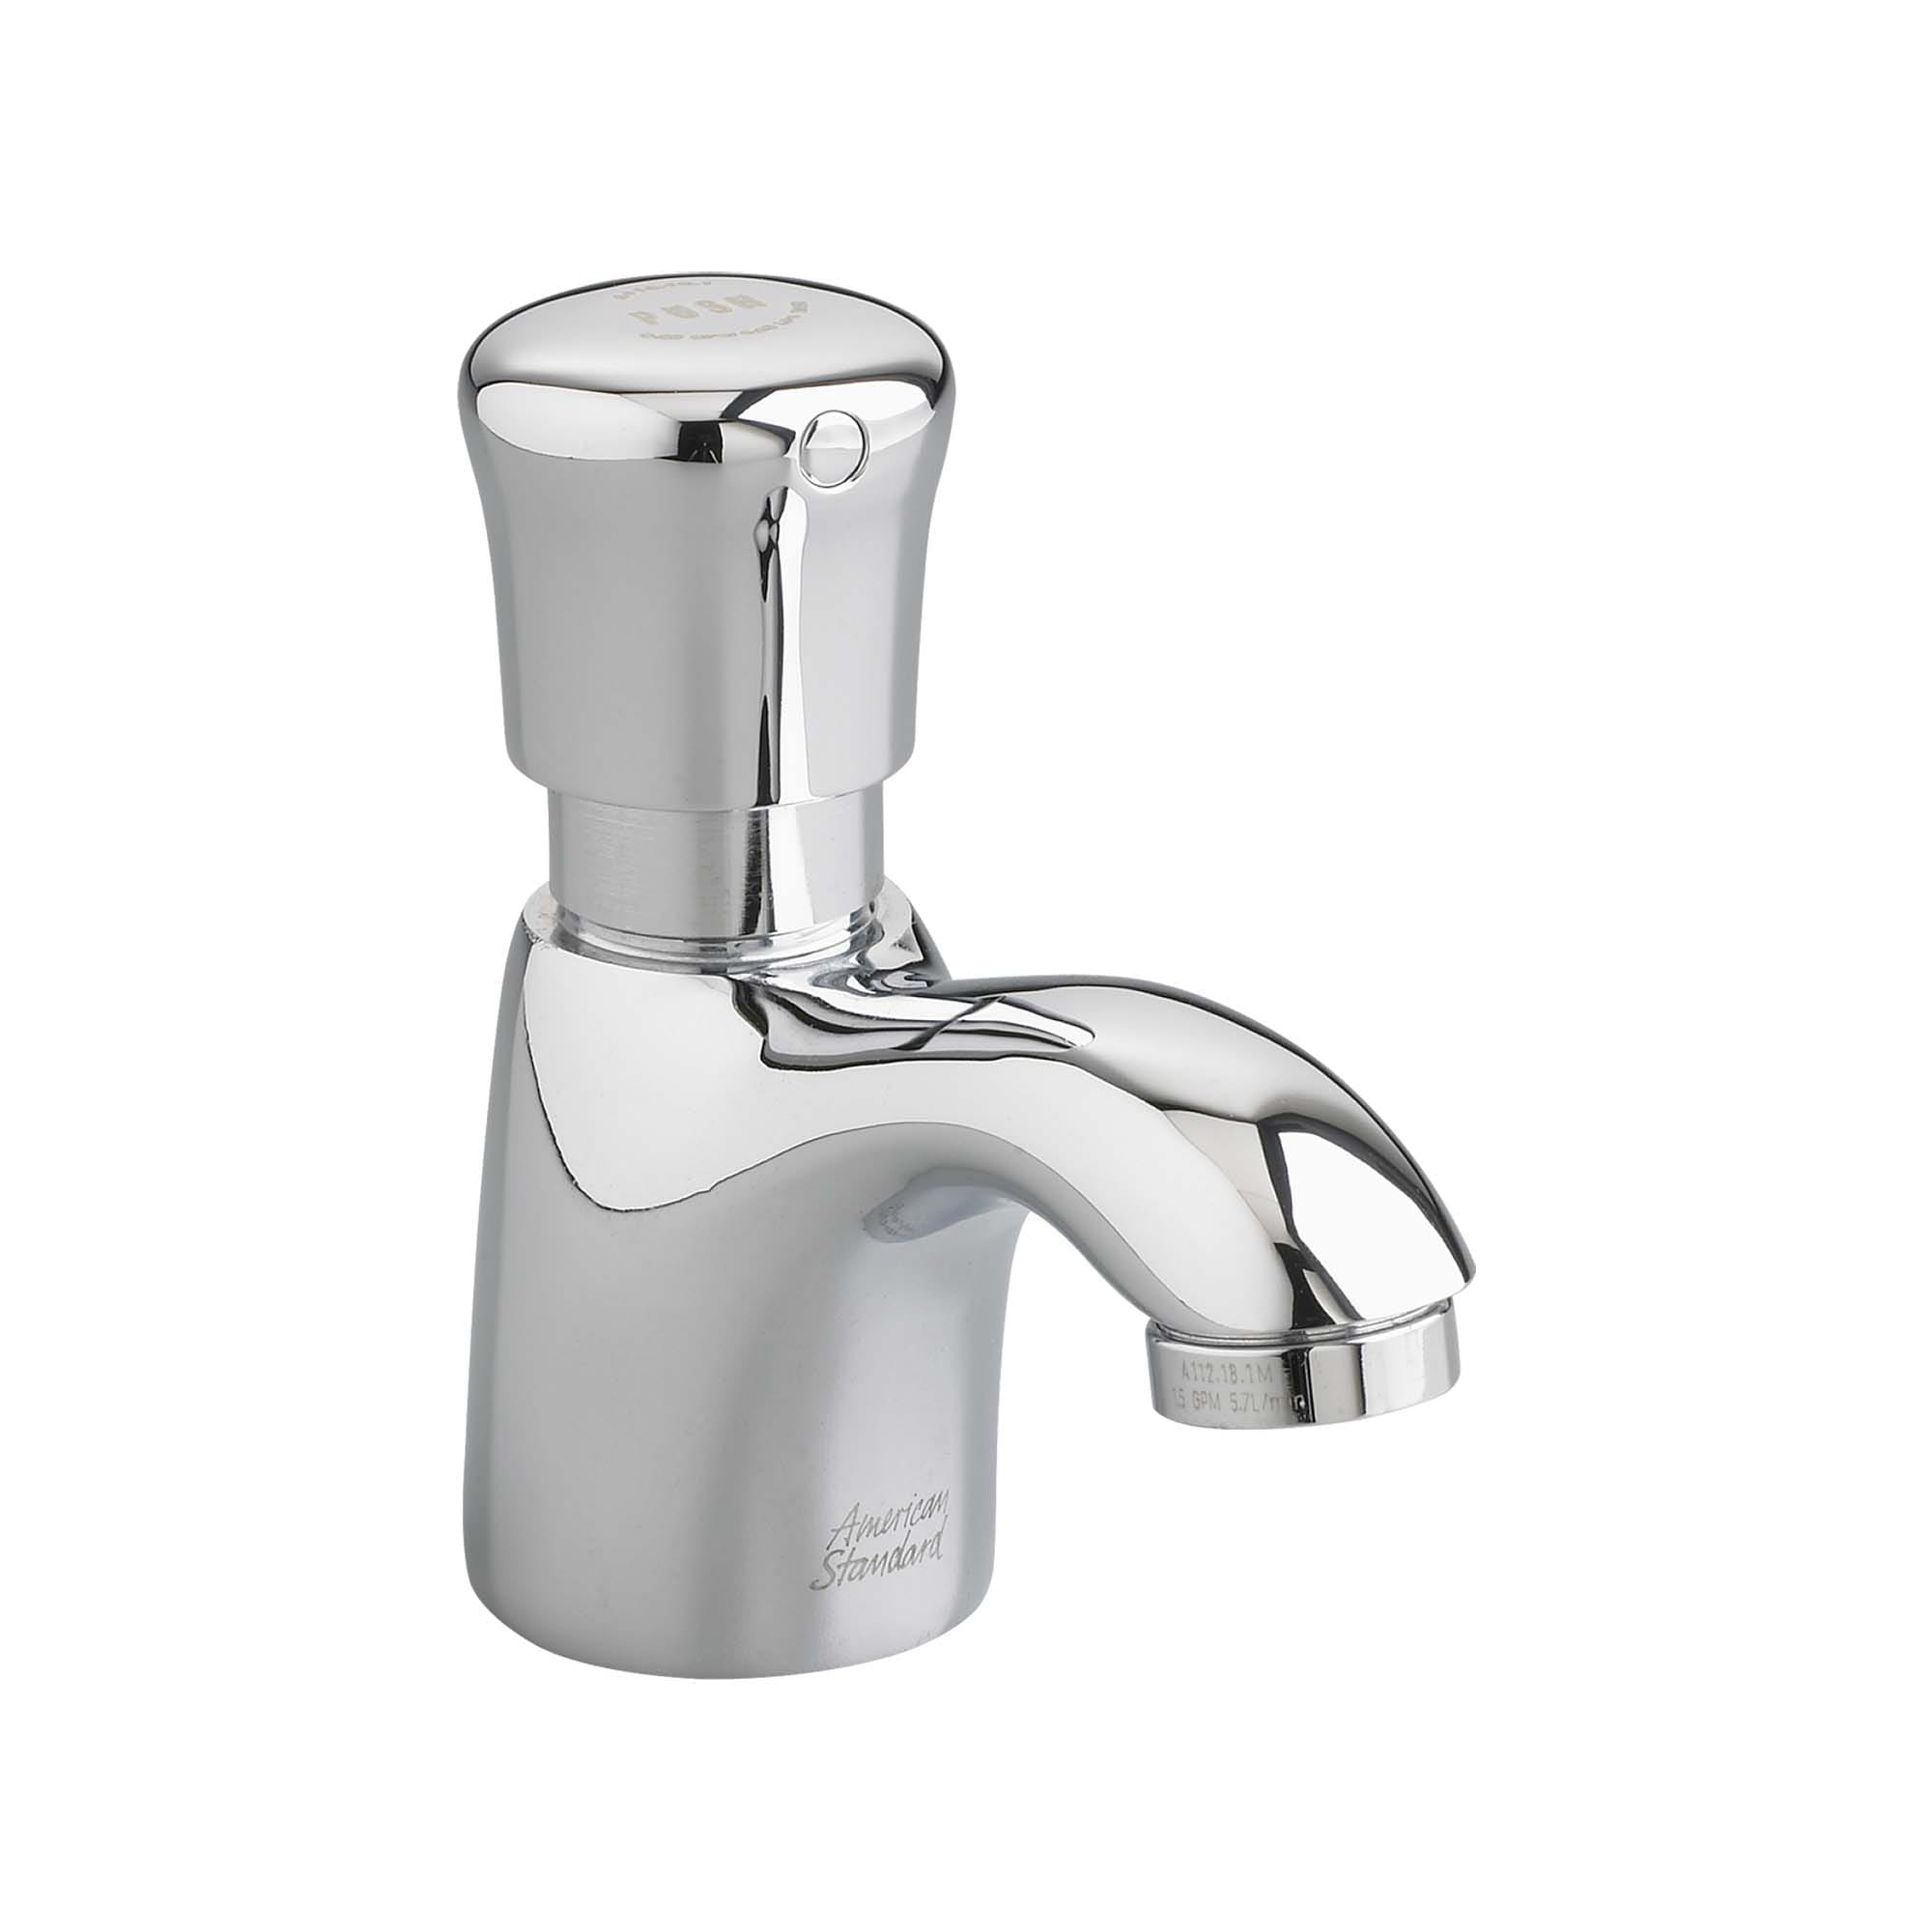 Metering Pillar Tap Faucet With Extended Spout 0.5 gpm/1.9 Lpf With Mechanical Mixing Valve